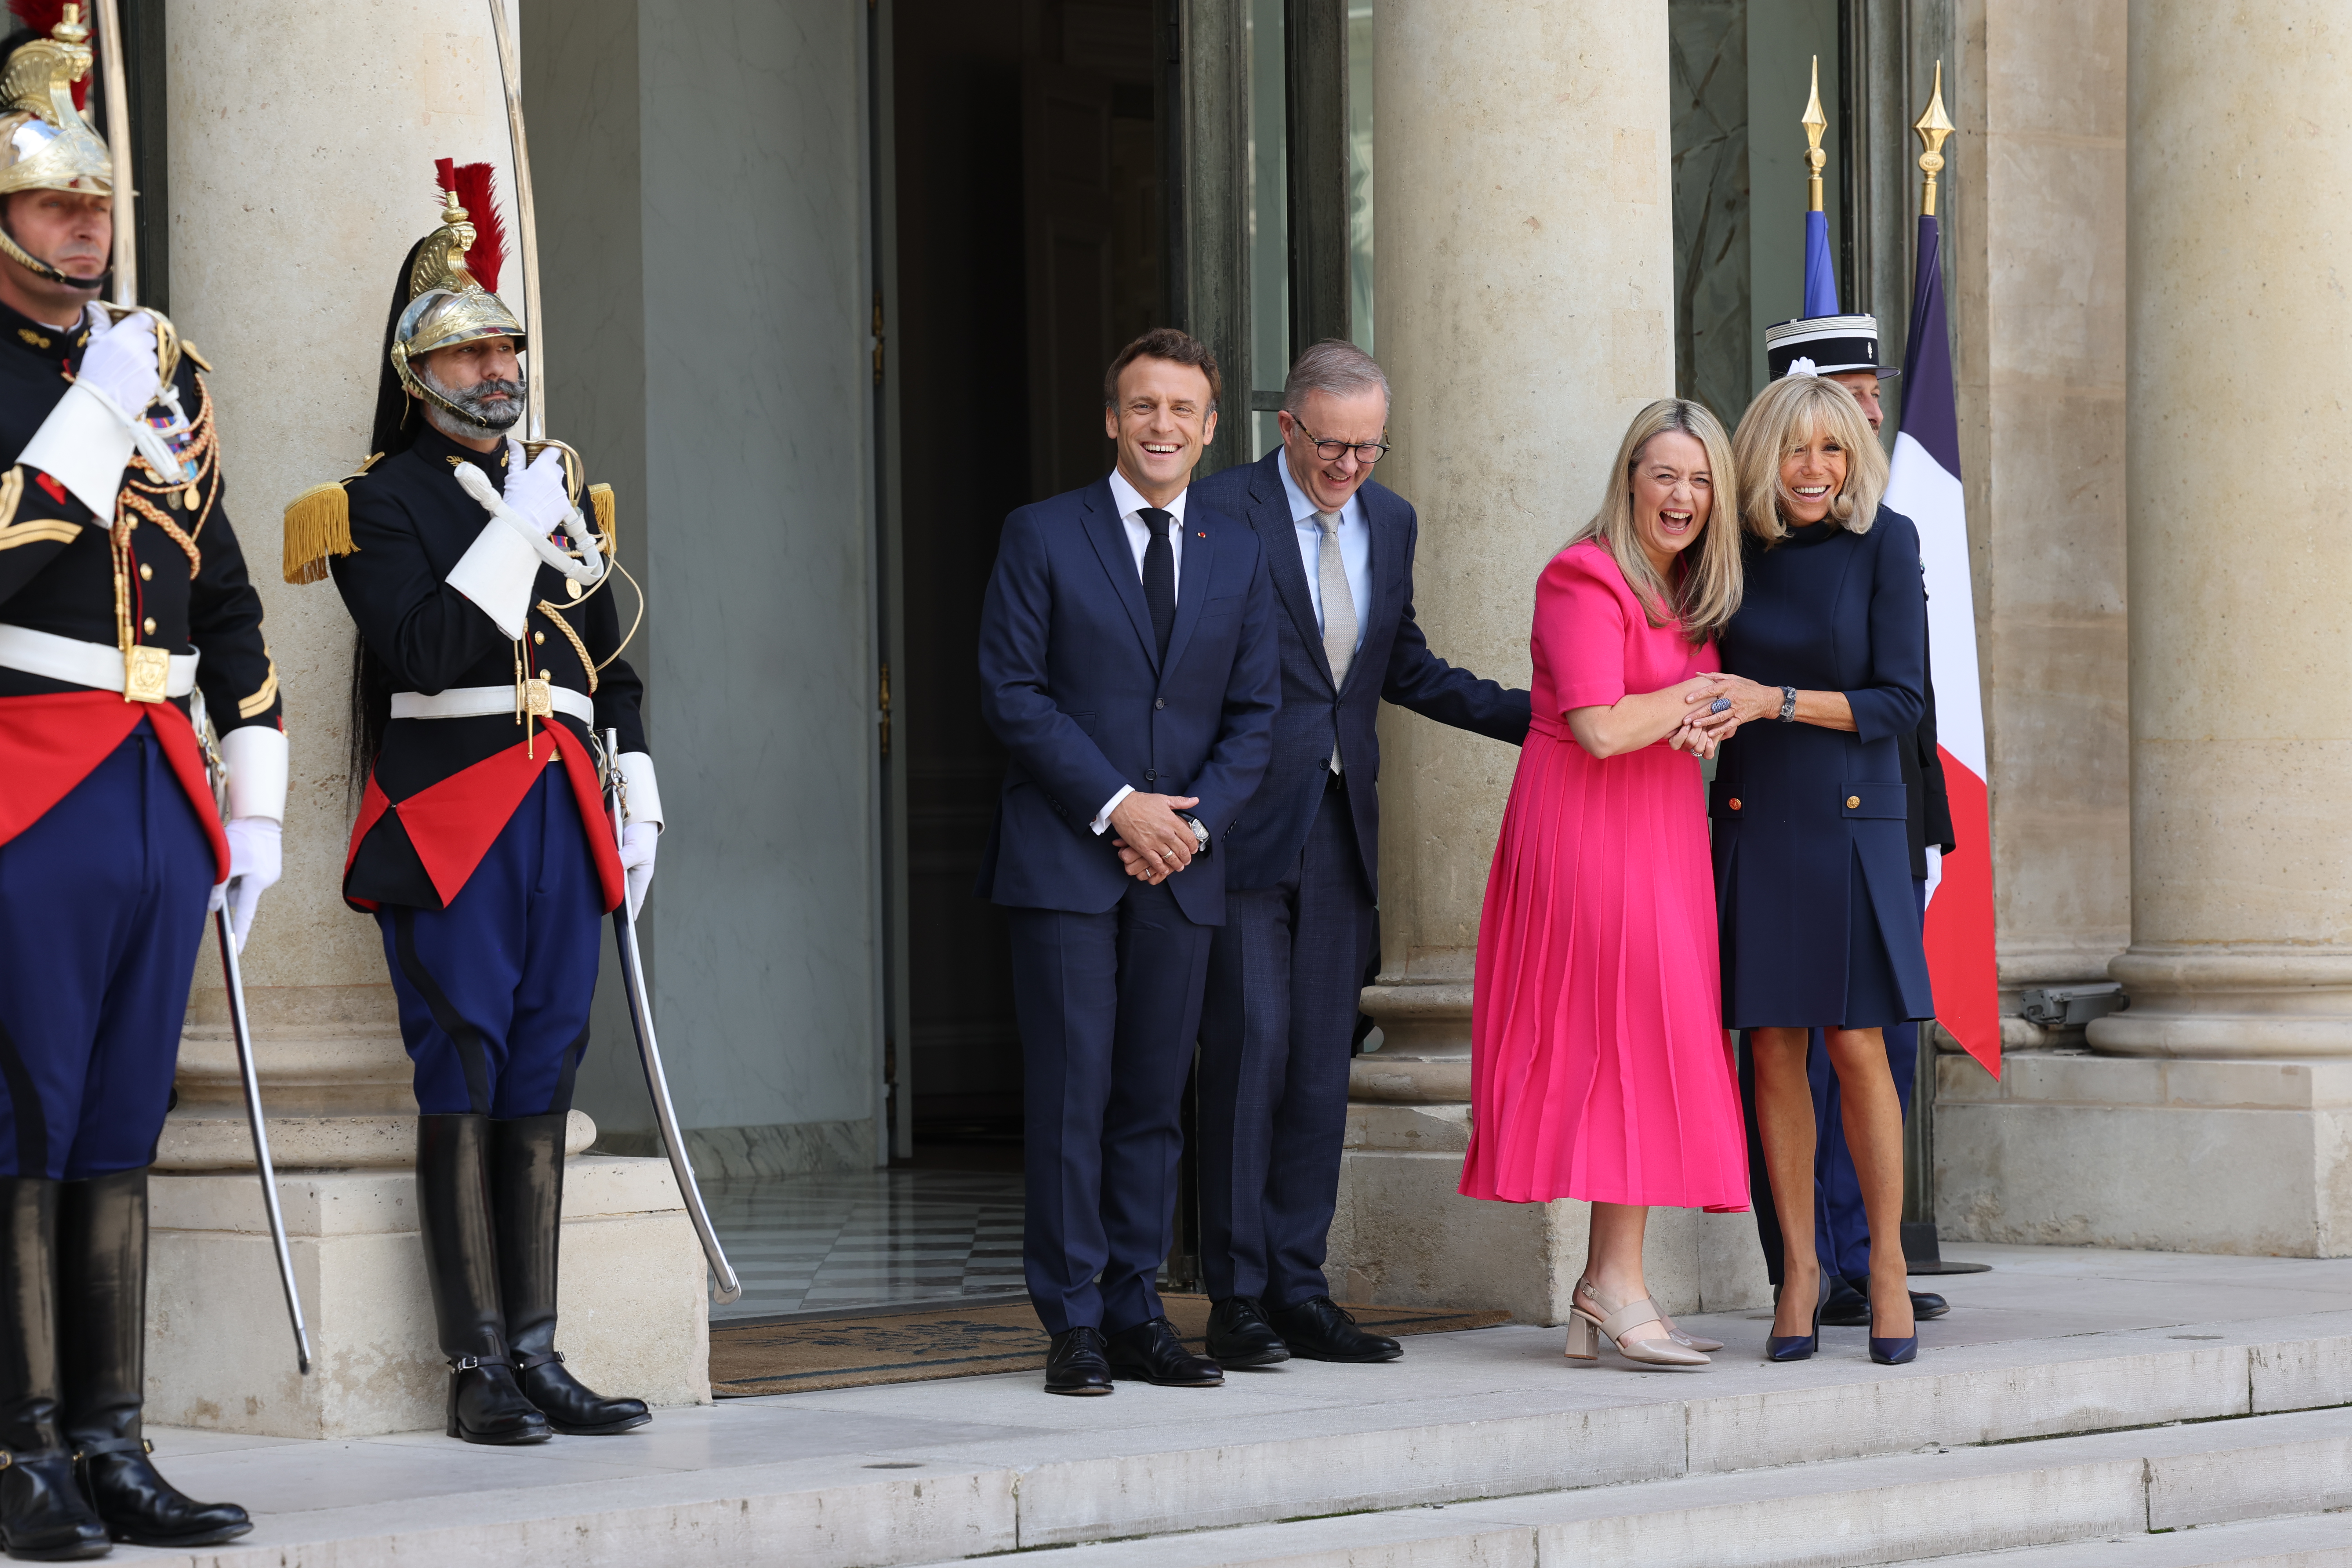 'A new chapter': Macron welcomes Albanese in Paris